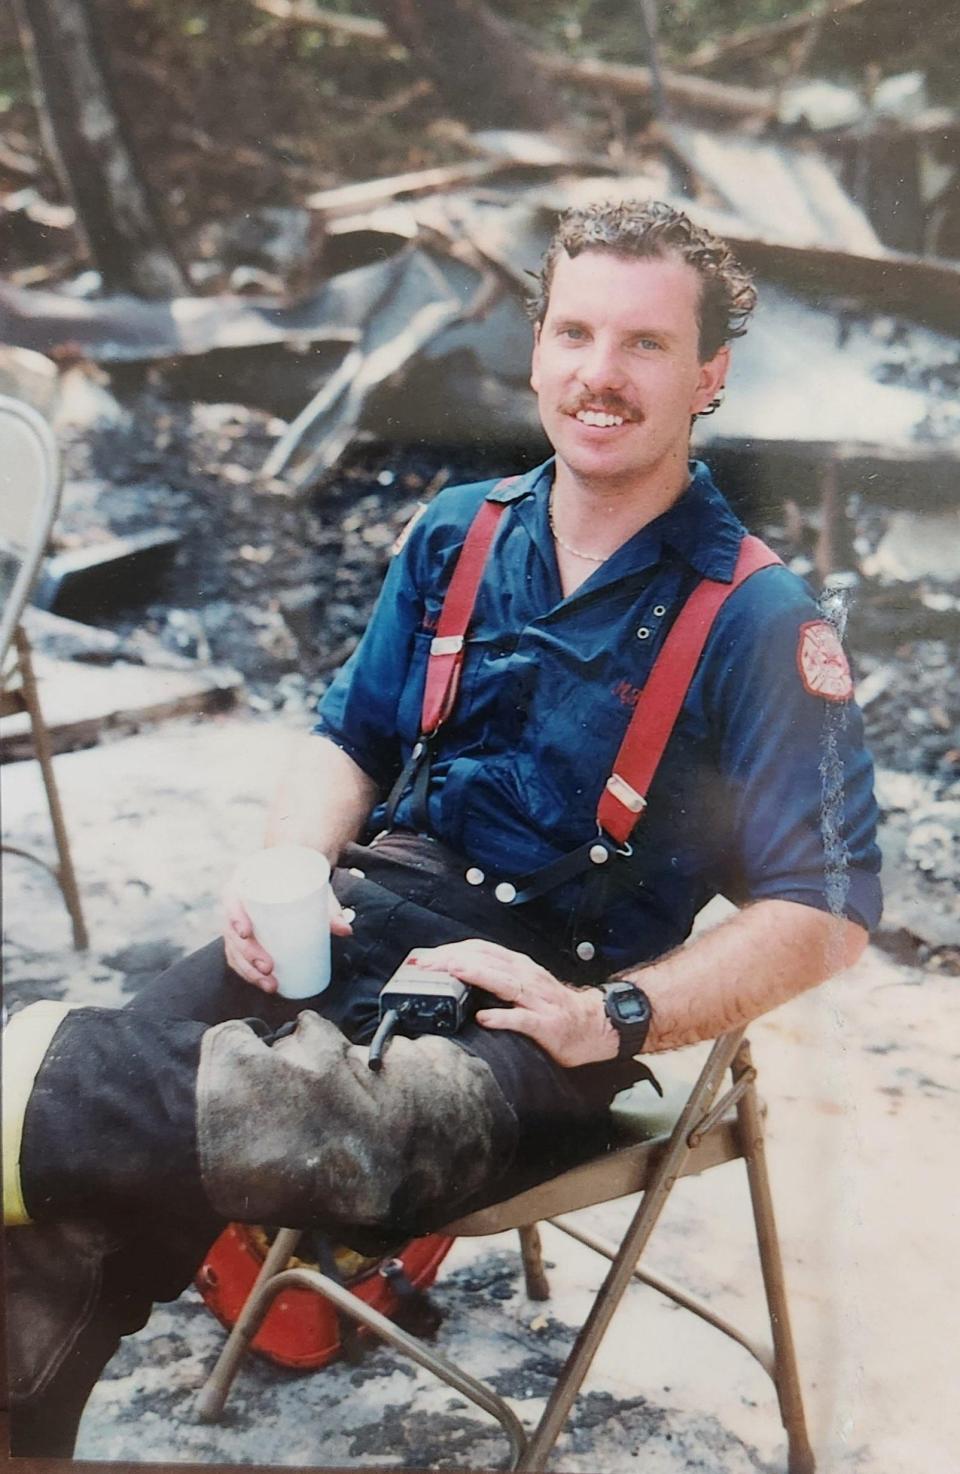 Danny Kuhlmann sits amidst rubble in his Columbia County Fire uniform.